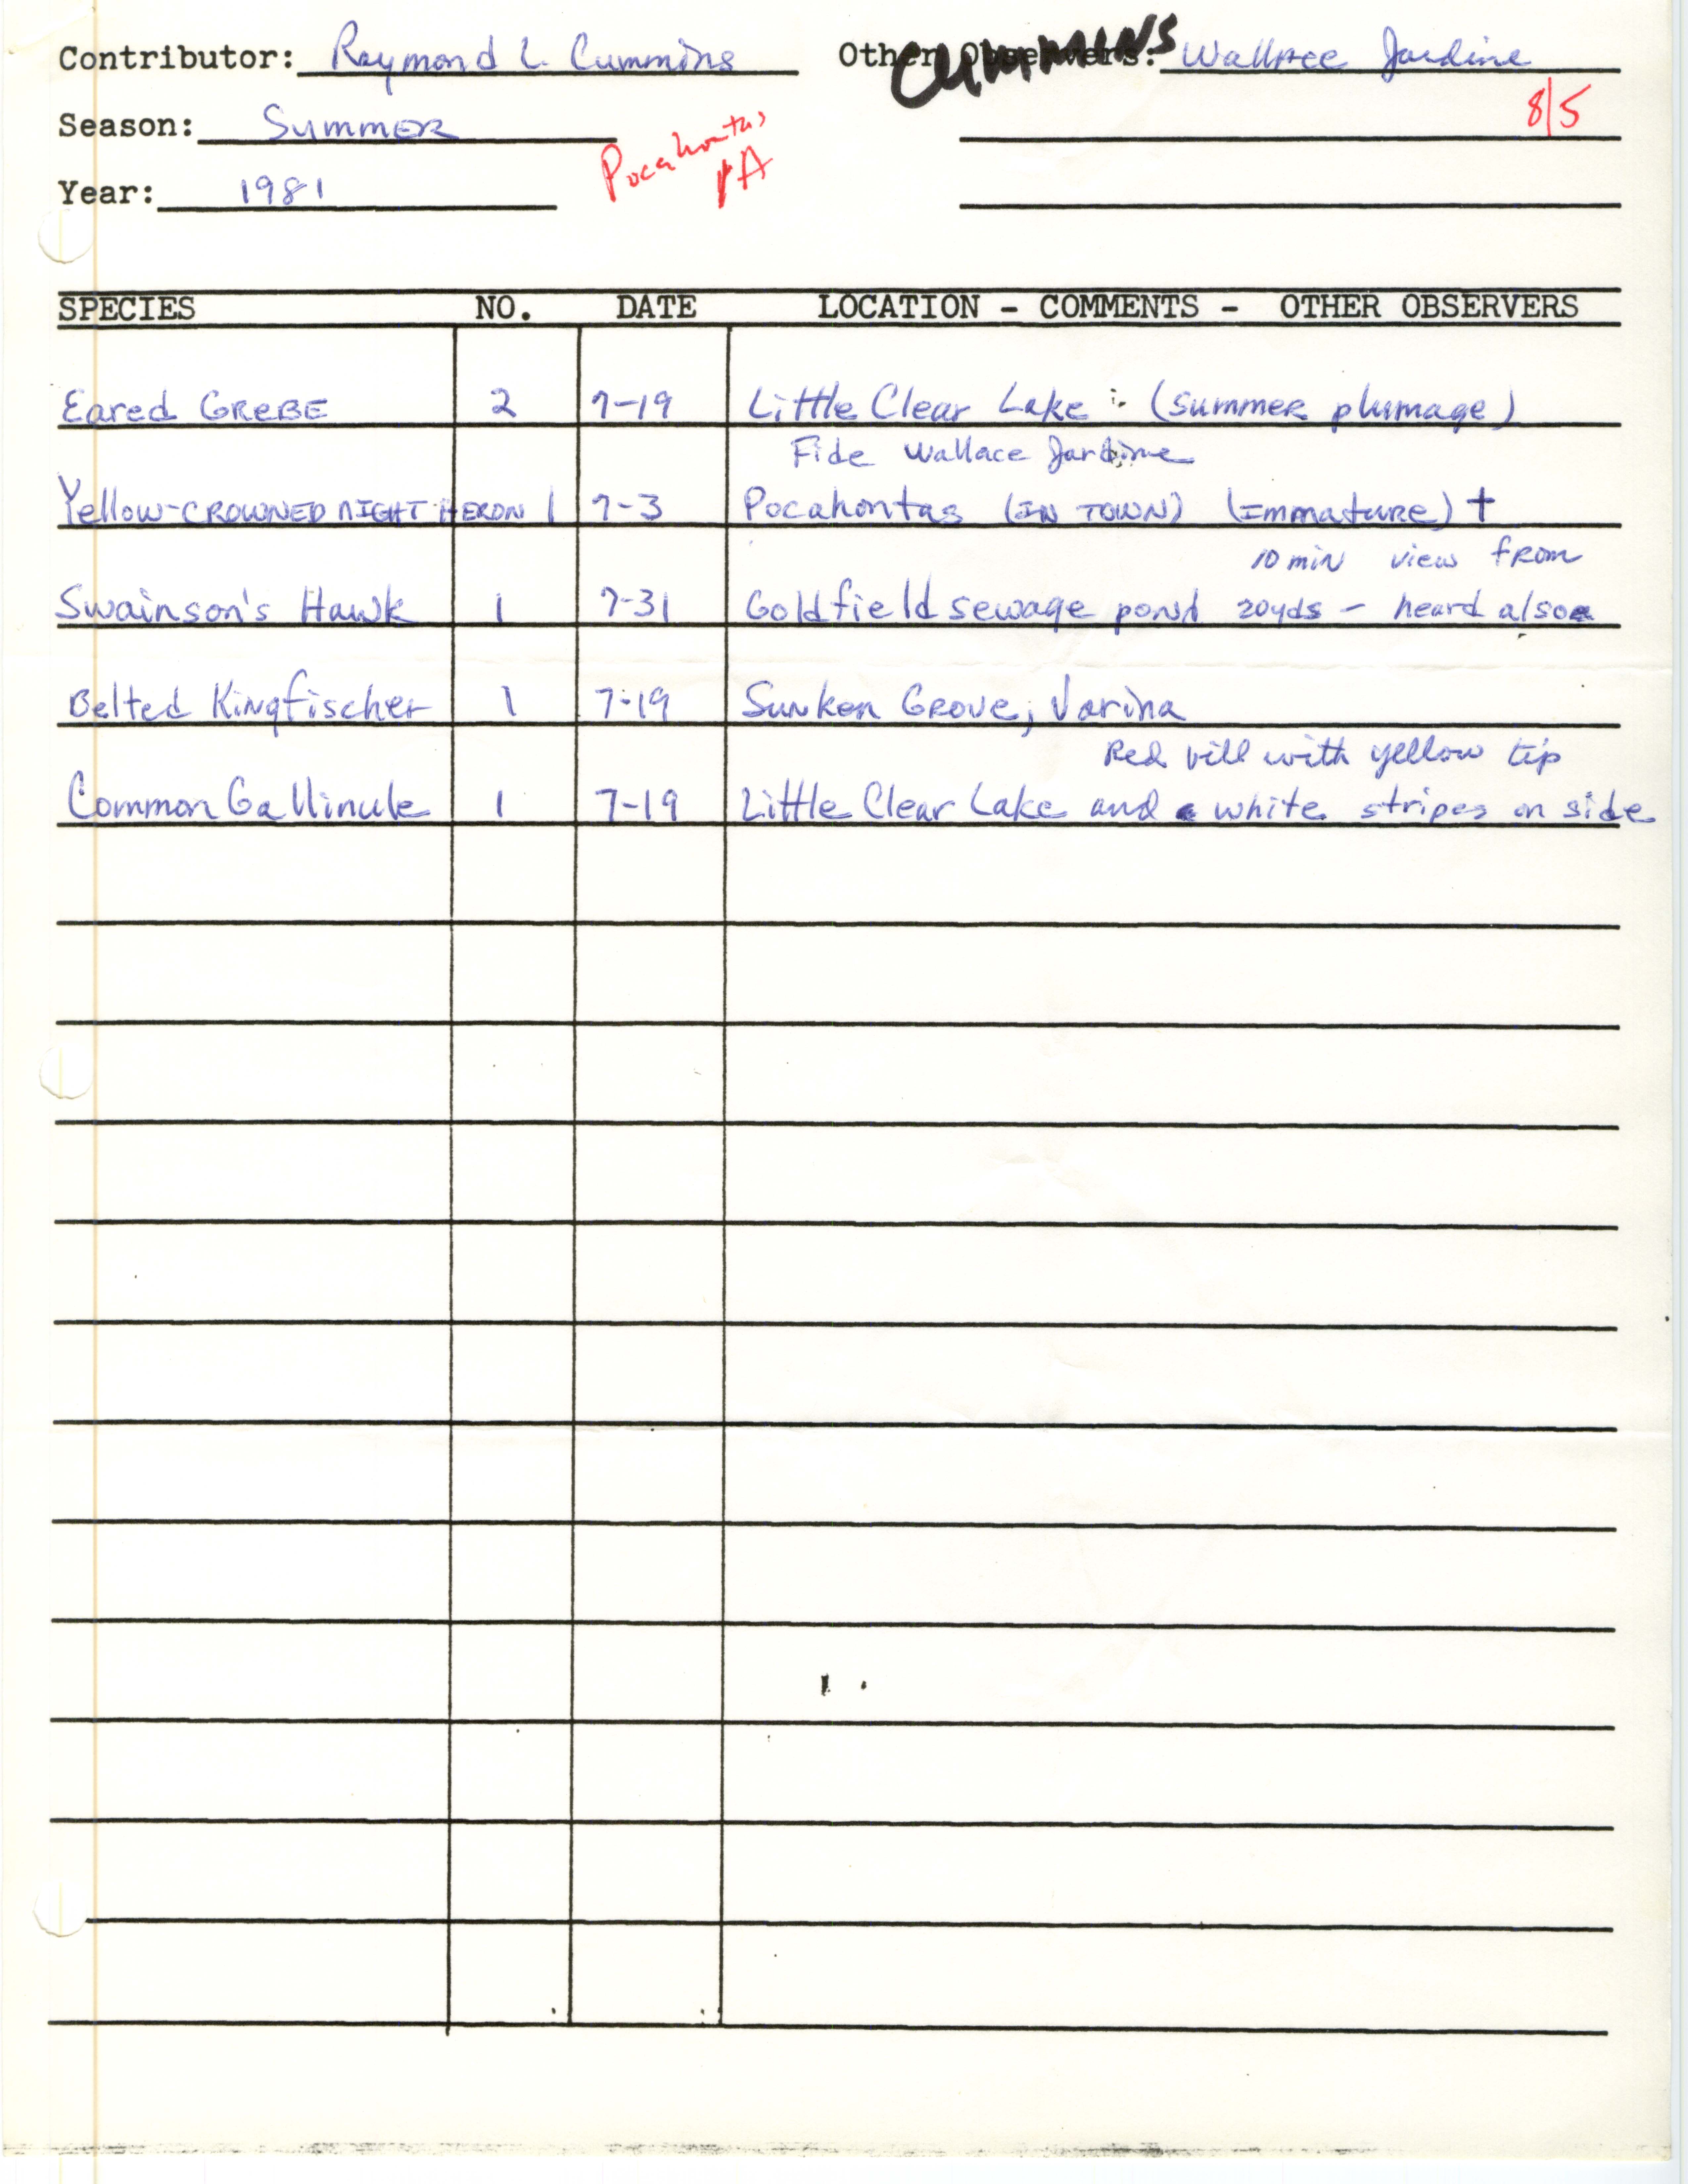 Field notes contributed by Raymond L. Cummins with verifying documentation, summer 1981